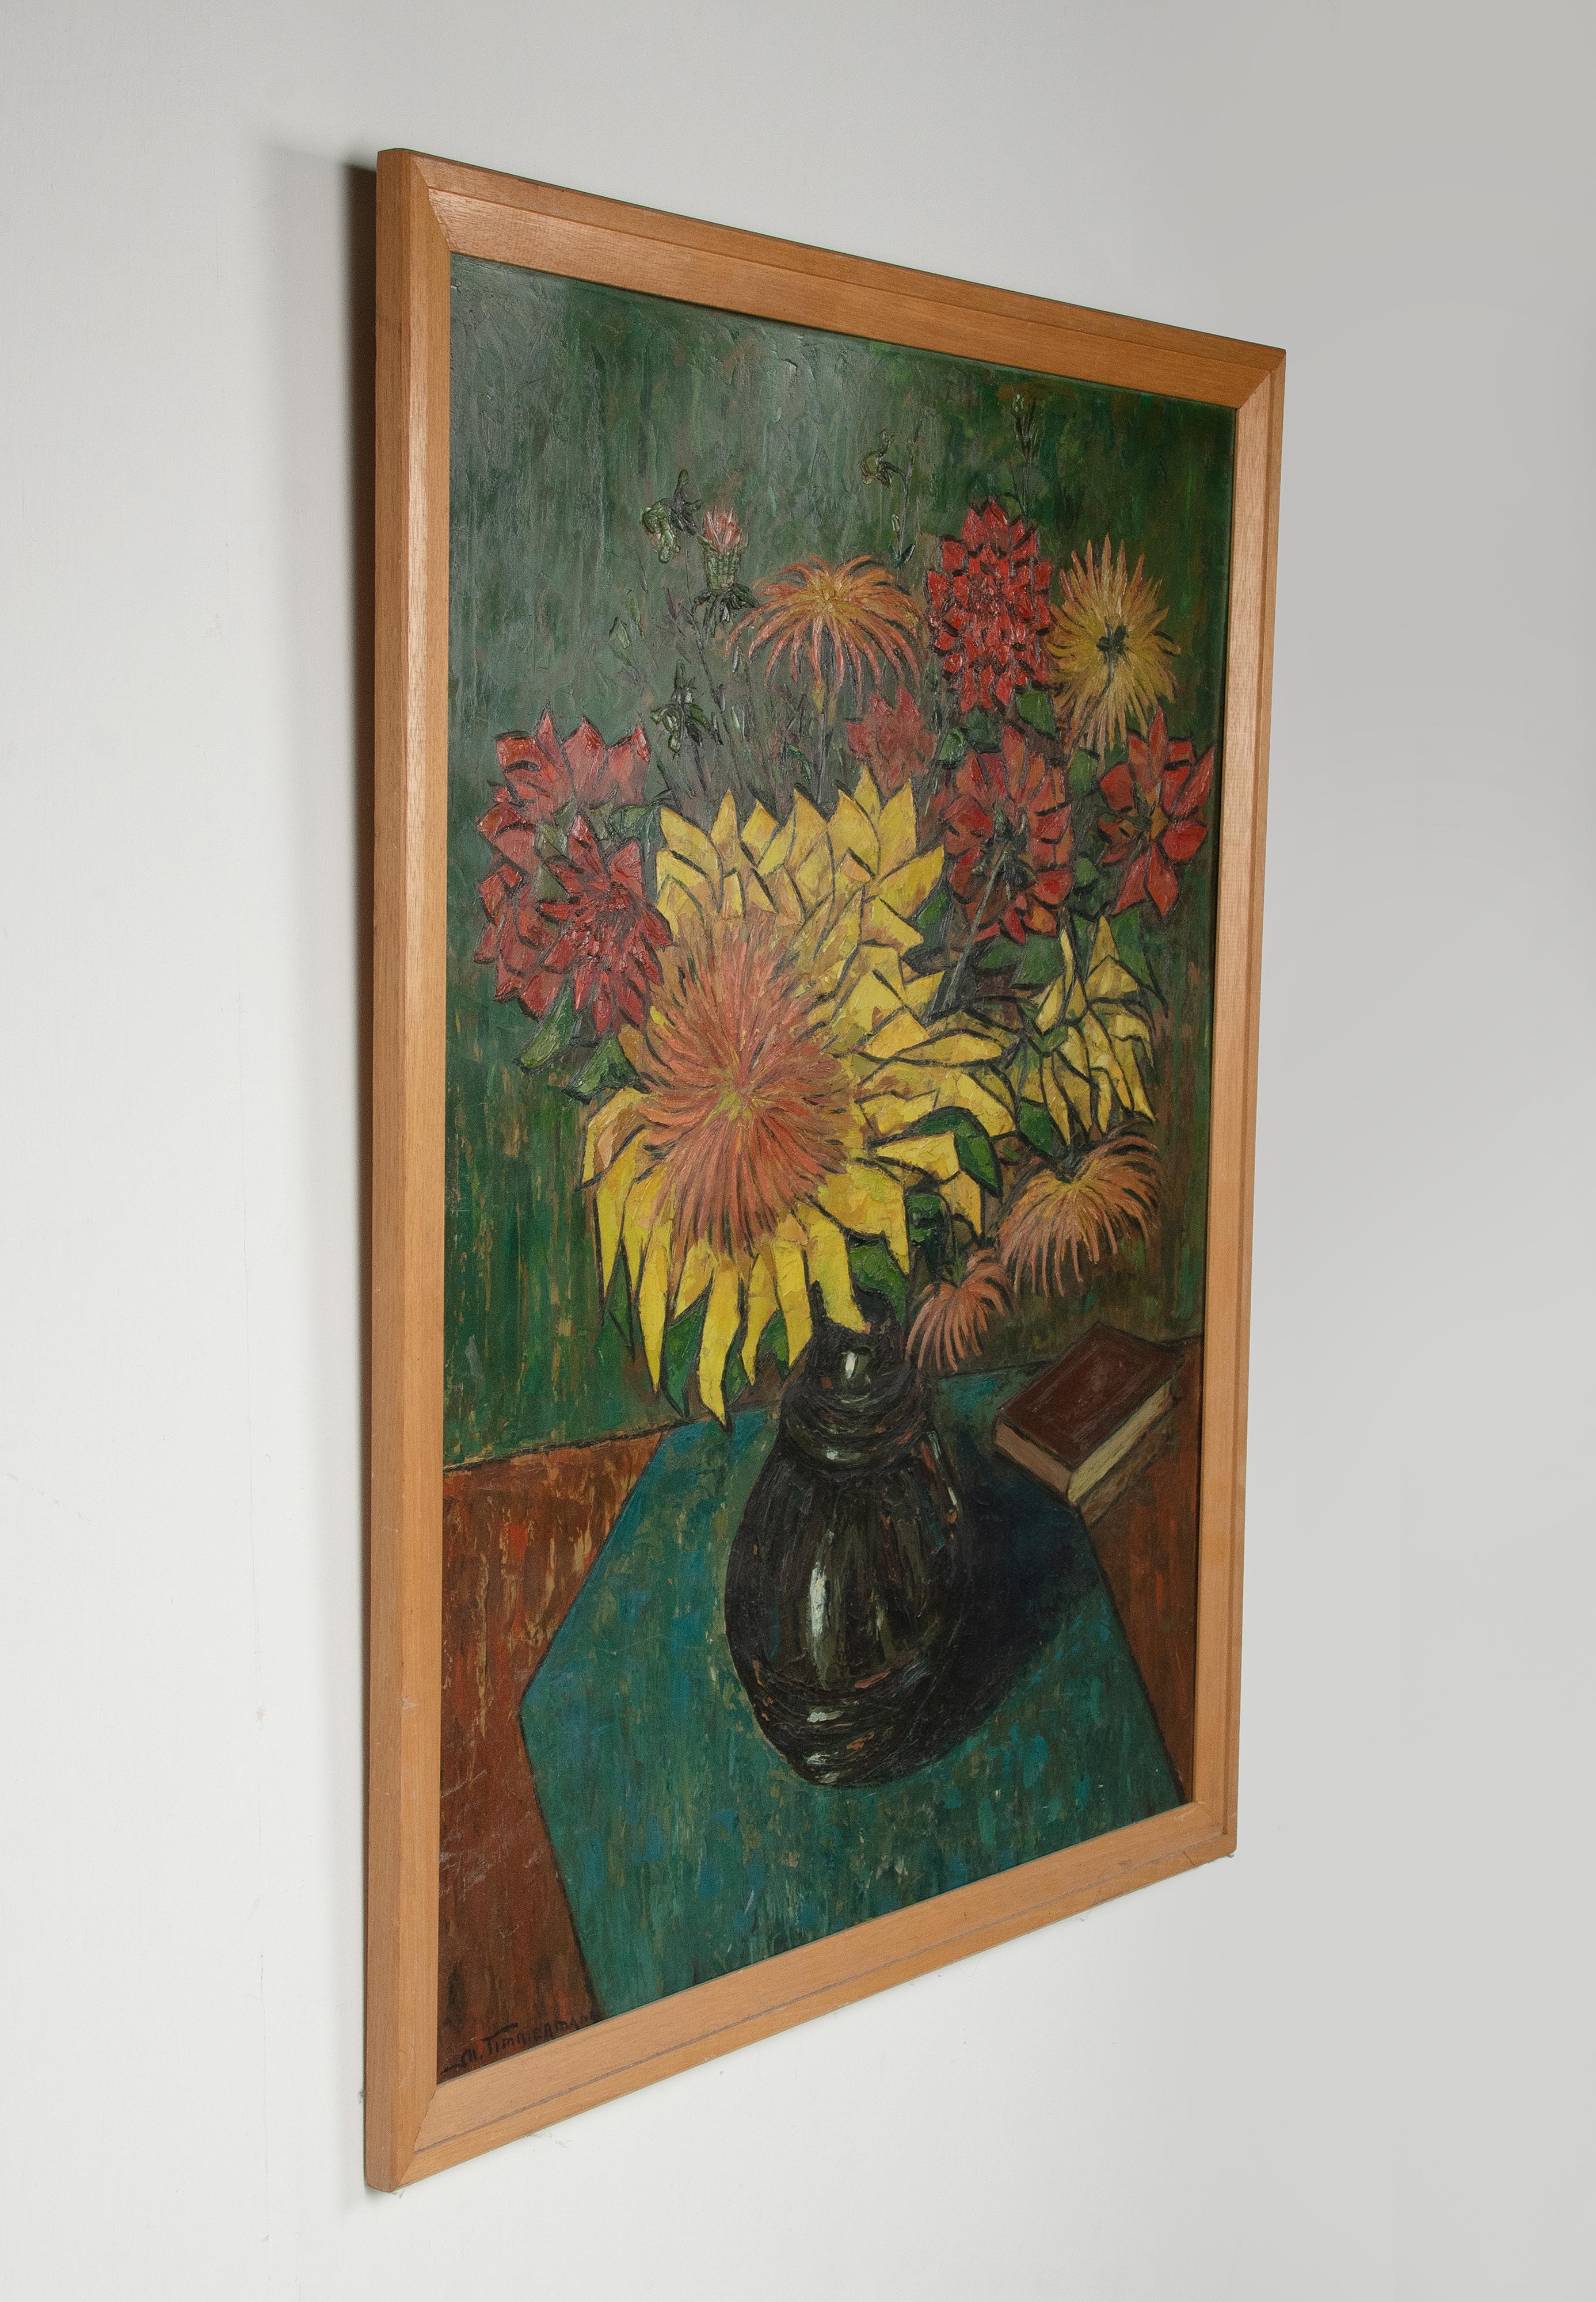 Hand-Painted Mid Century Modern Oil Painting Flower Still Life signed Timmermans